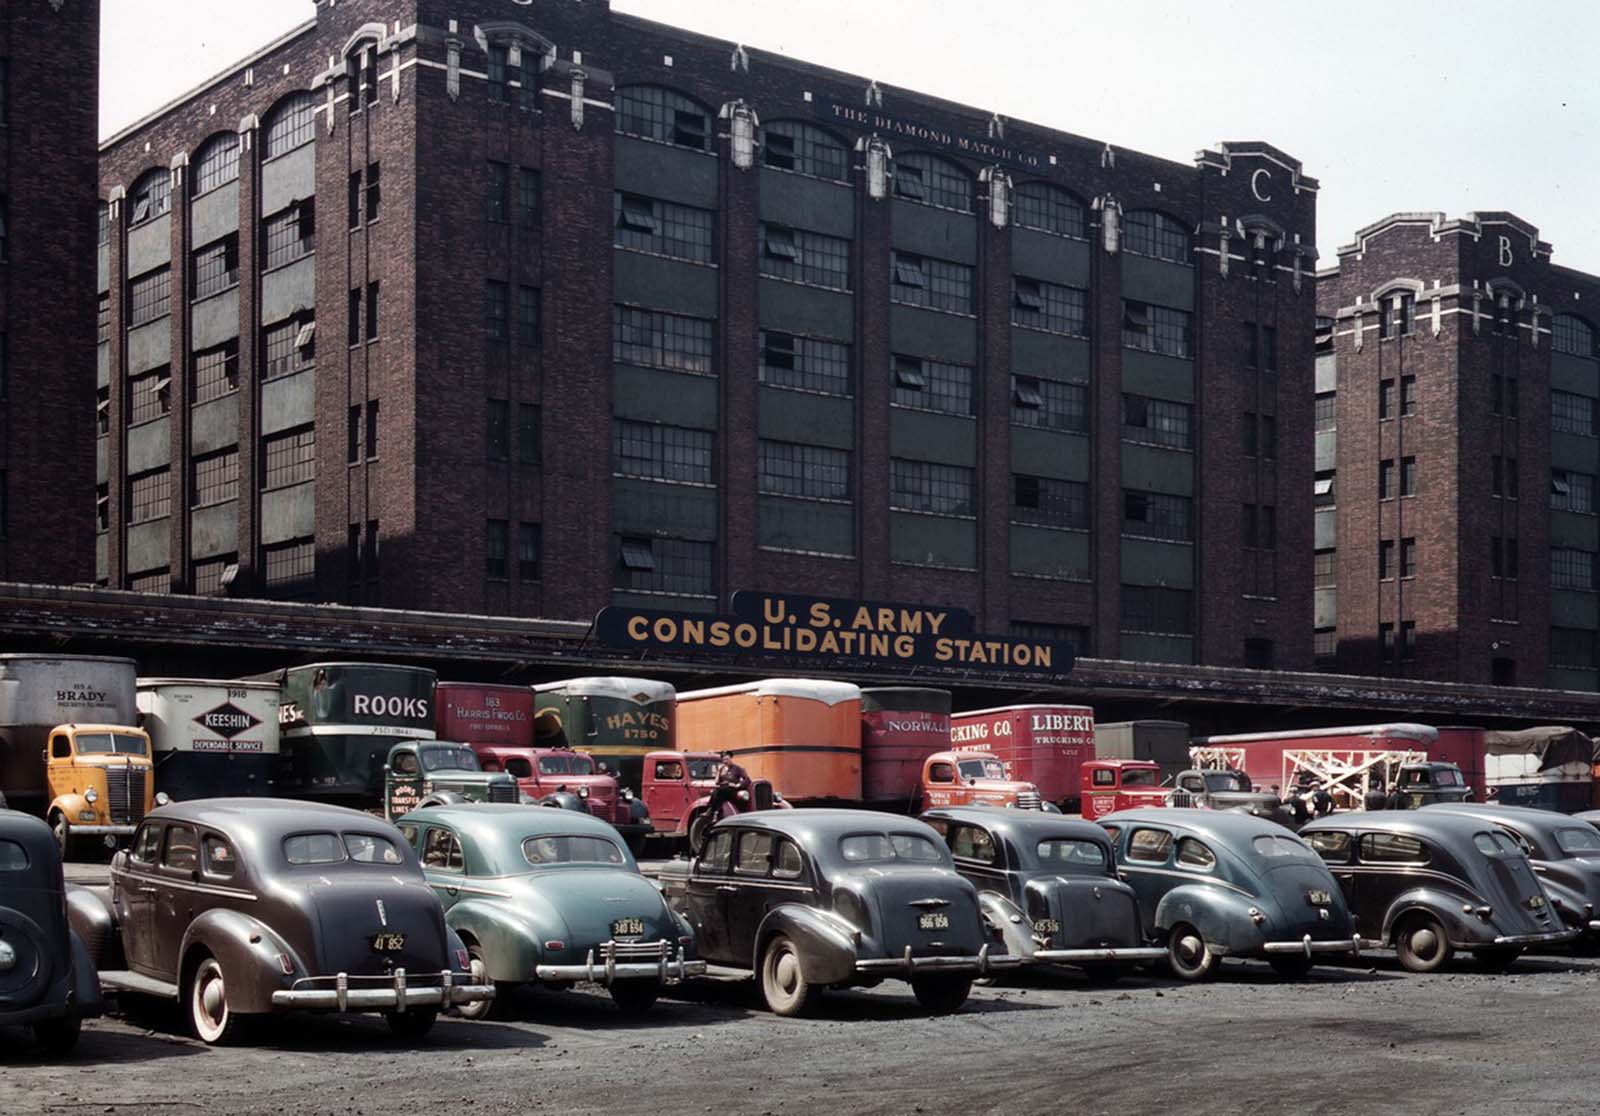 The freight depot of the U.S. Army consolidating station in Chicago in April 1943.